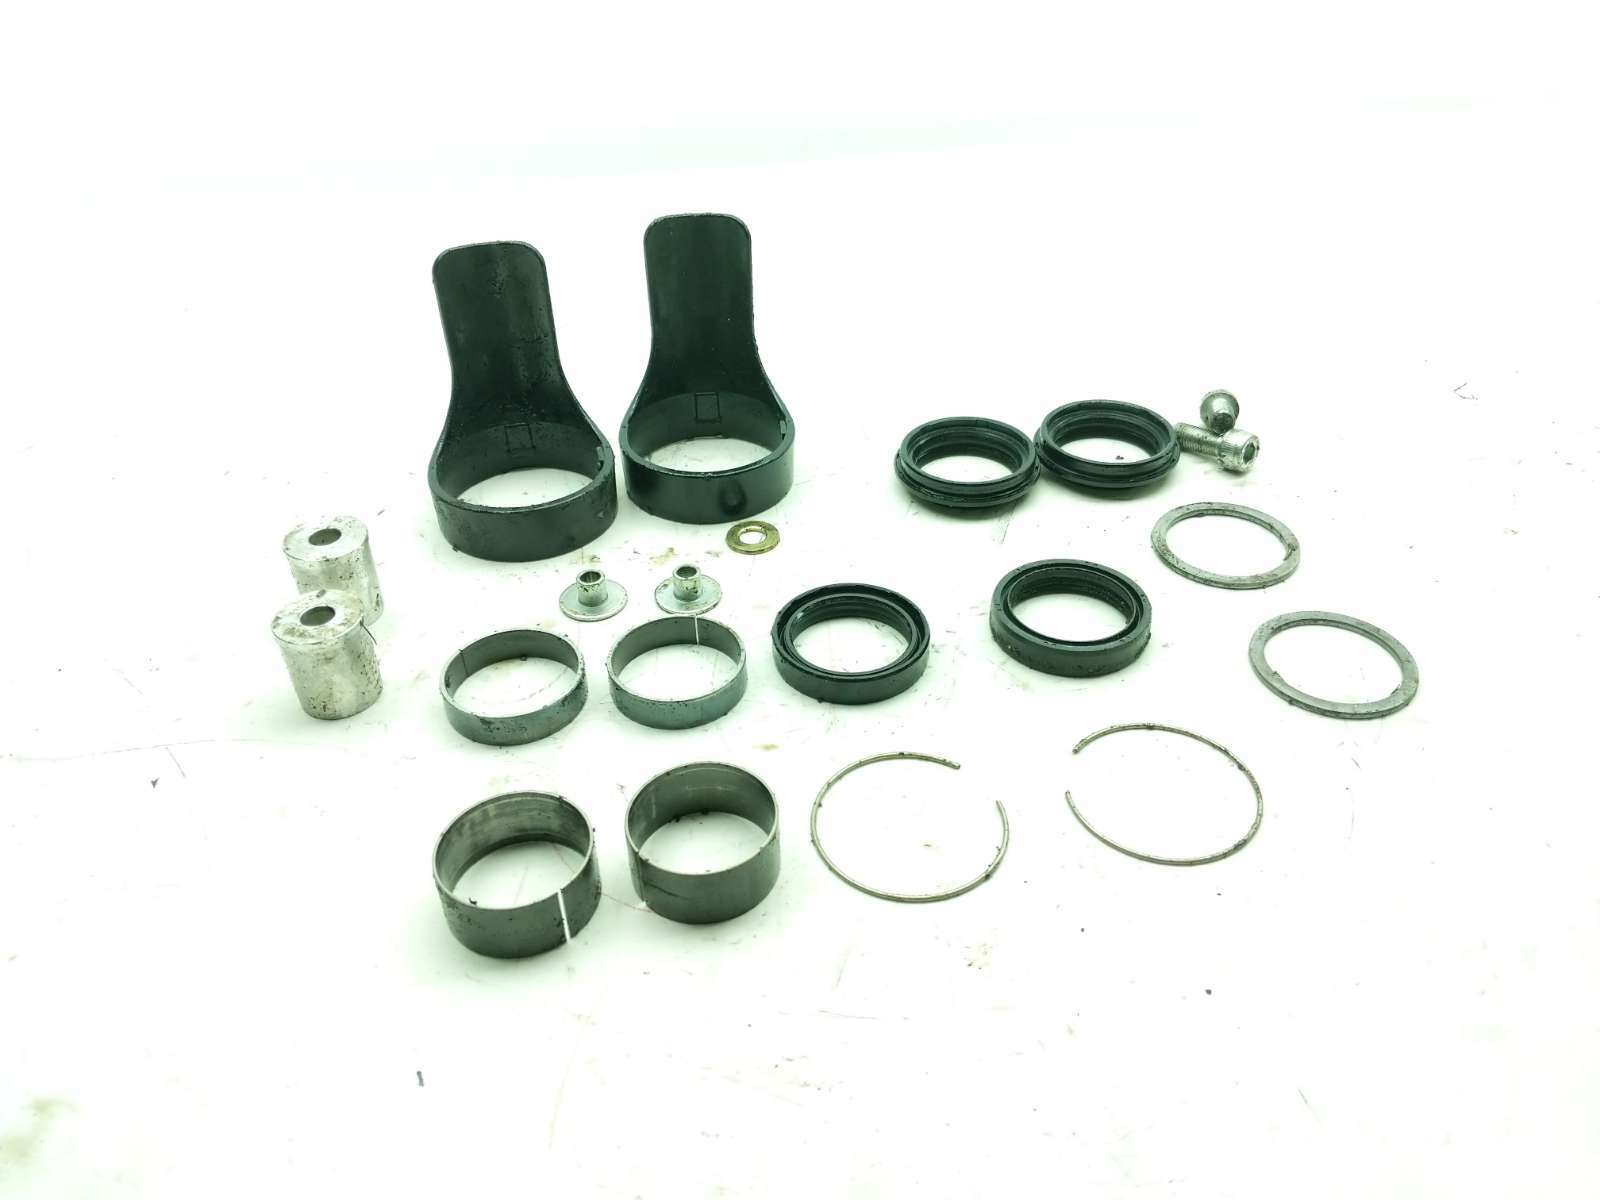 15 Yamaha FZ6R FZ6 Front Forks Seals and Gaskets Set